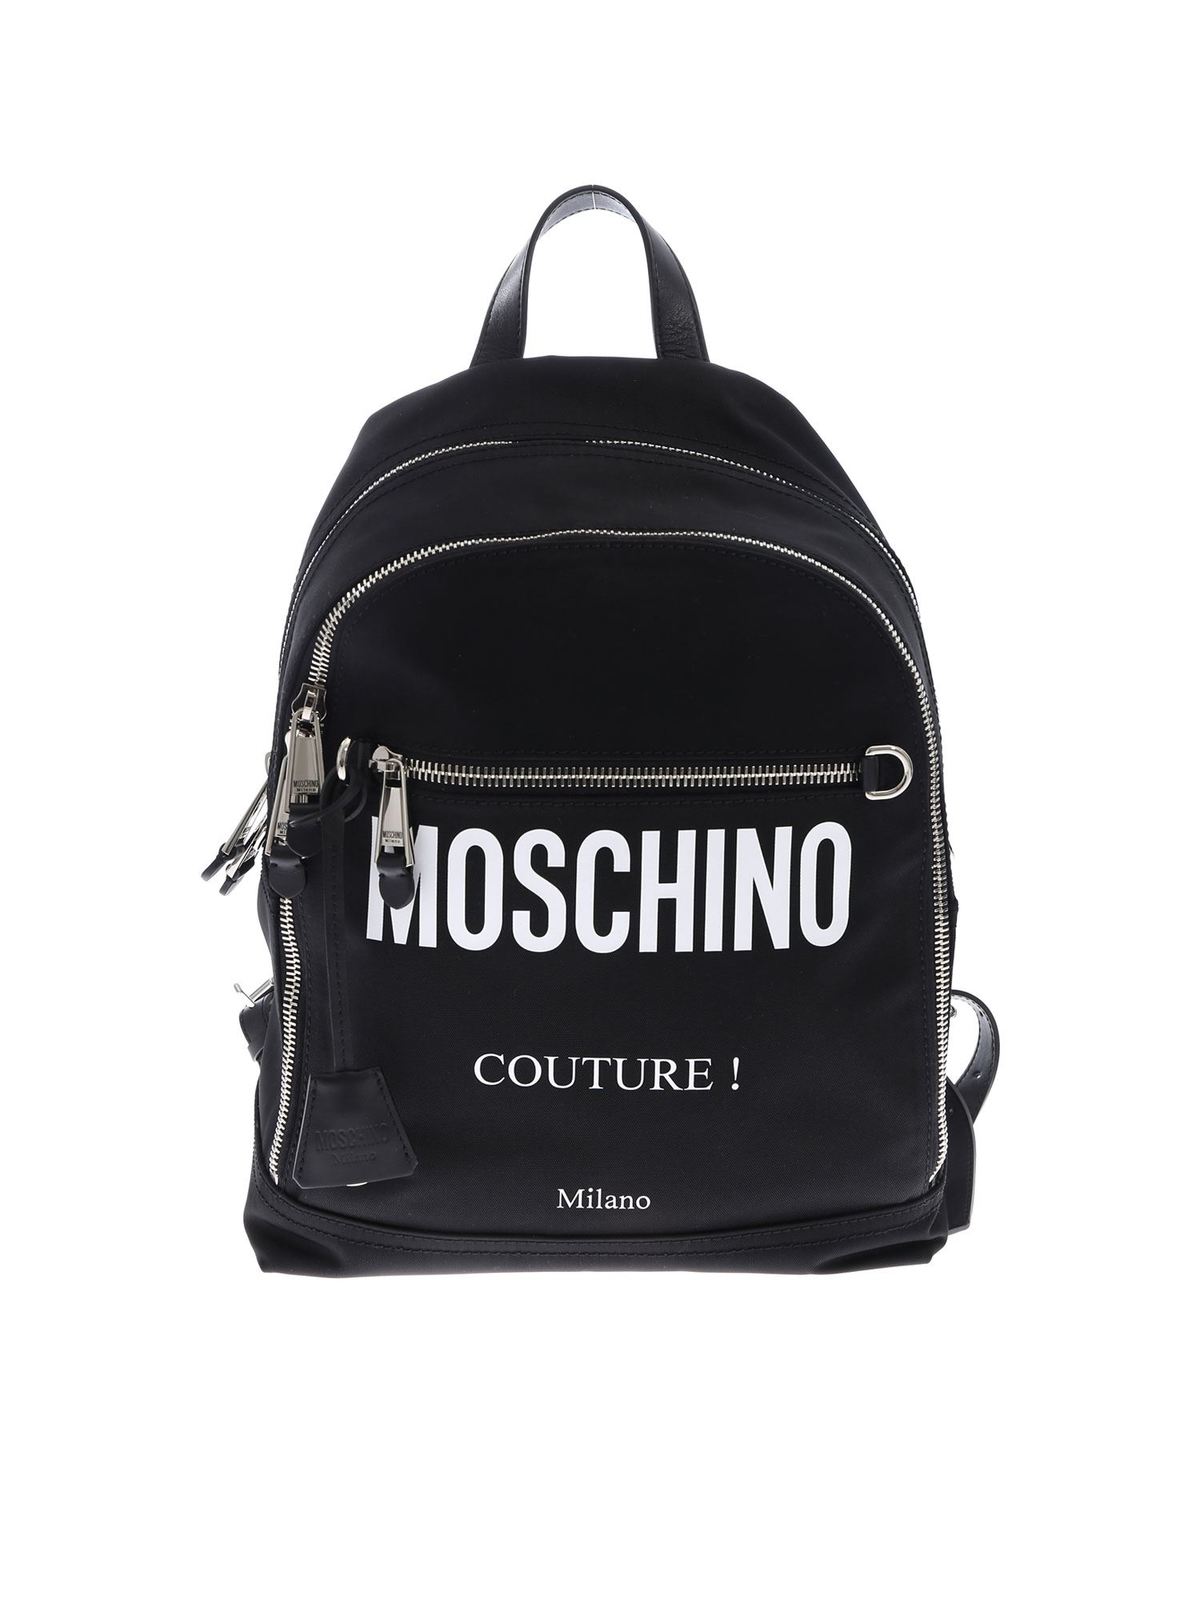 Moschino - Moschino Couture backpack in 